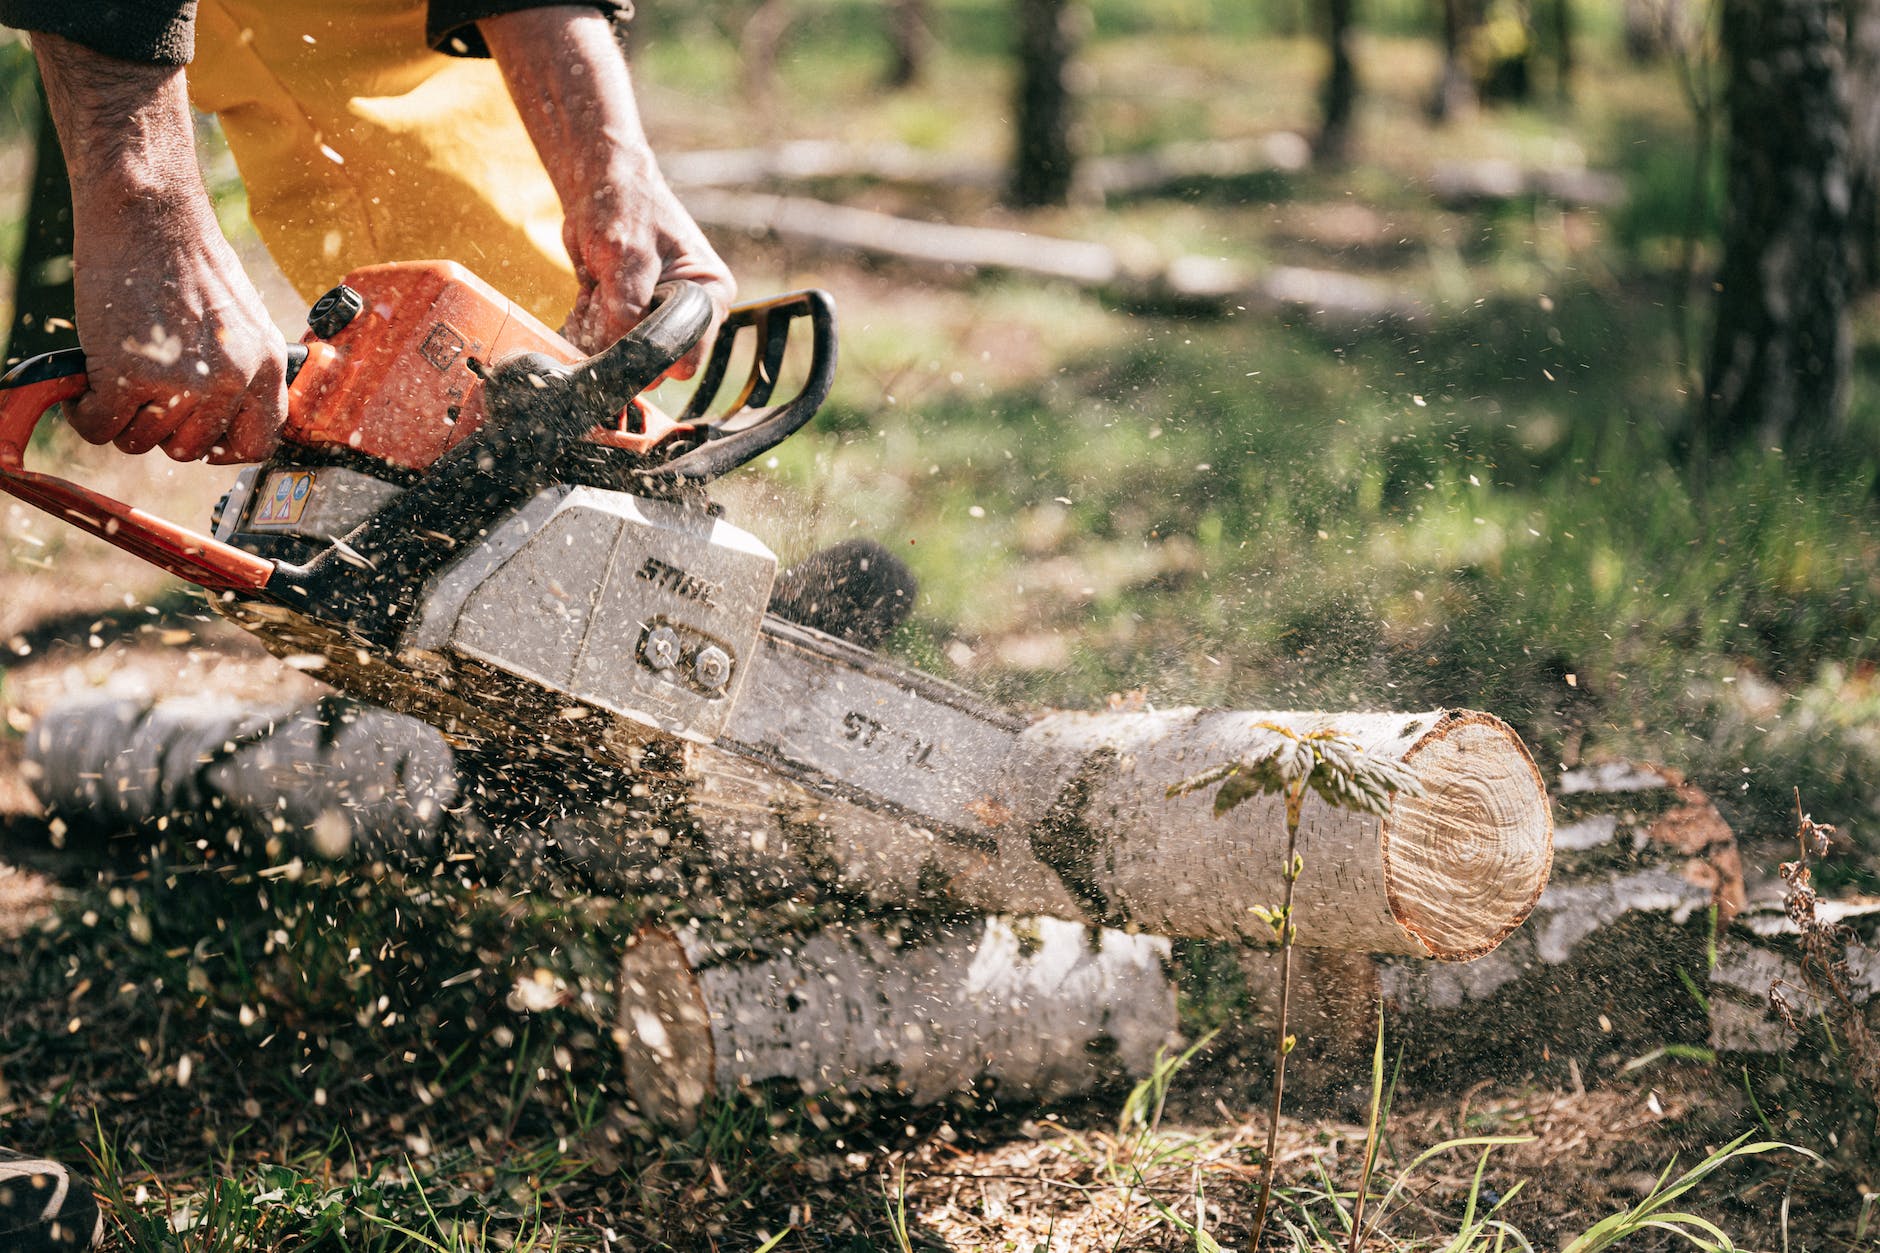 Dating Advice from Man Who Started Juggling Chainsaws But Doesn’t Know How to Stop